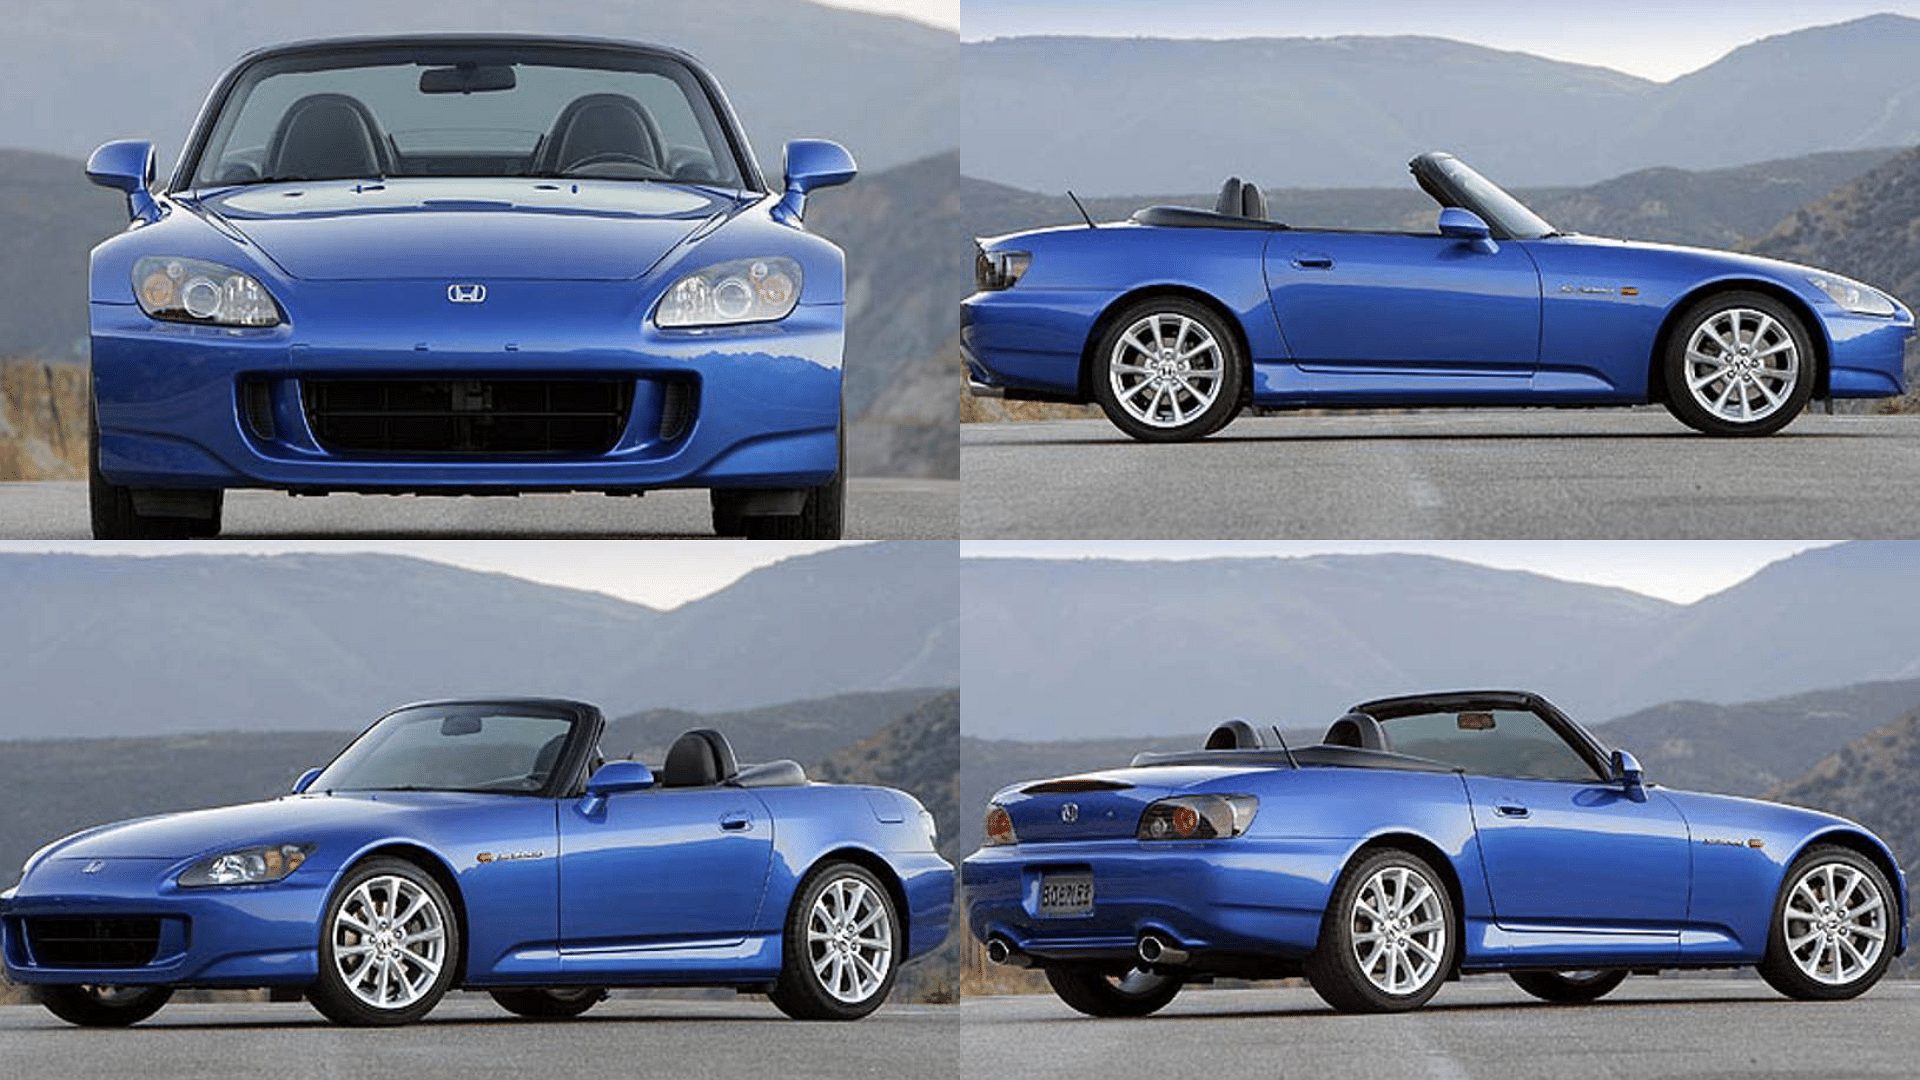 Honda S2000 Convertible - front view, side view, rear view